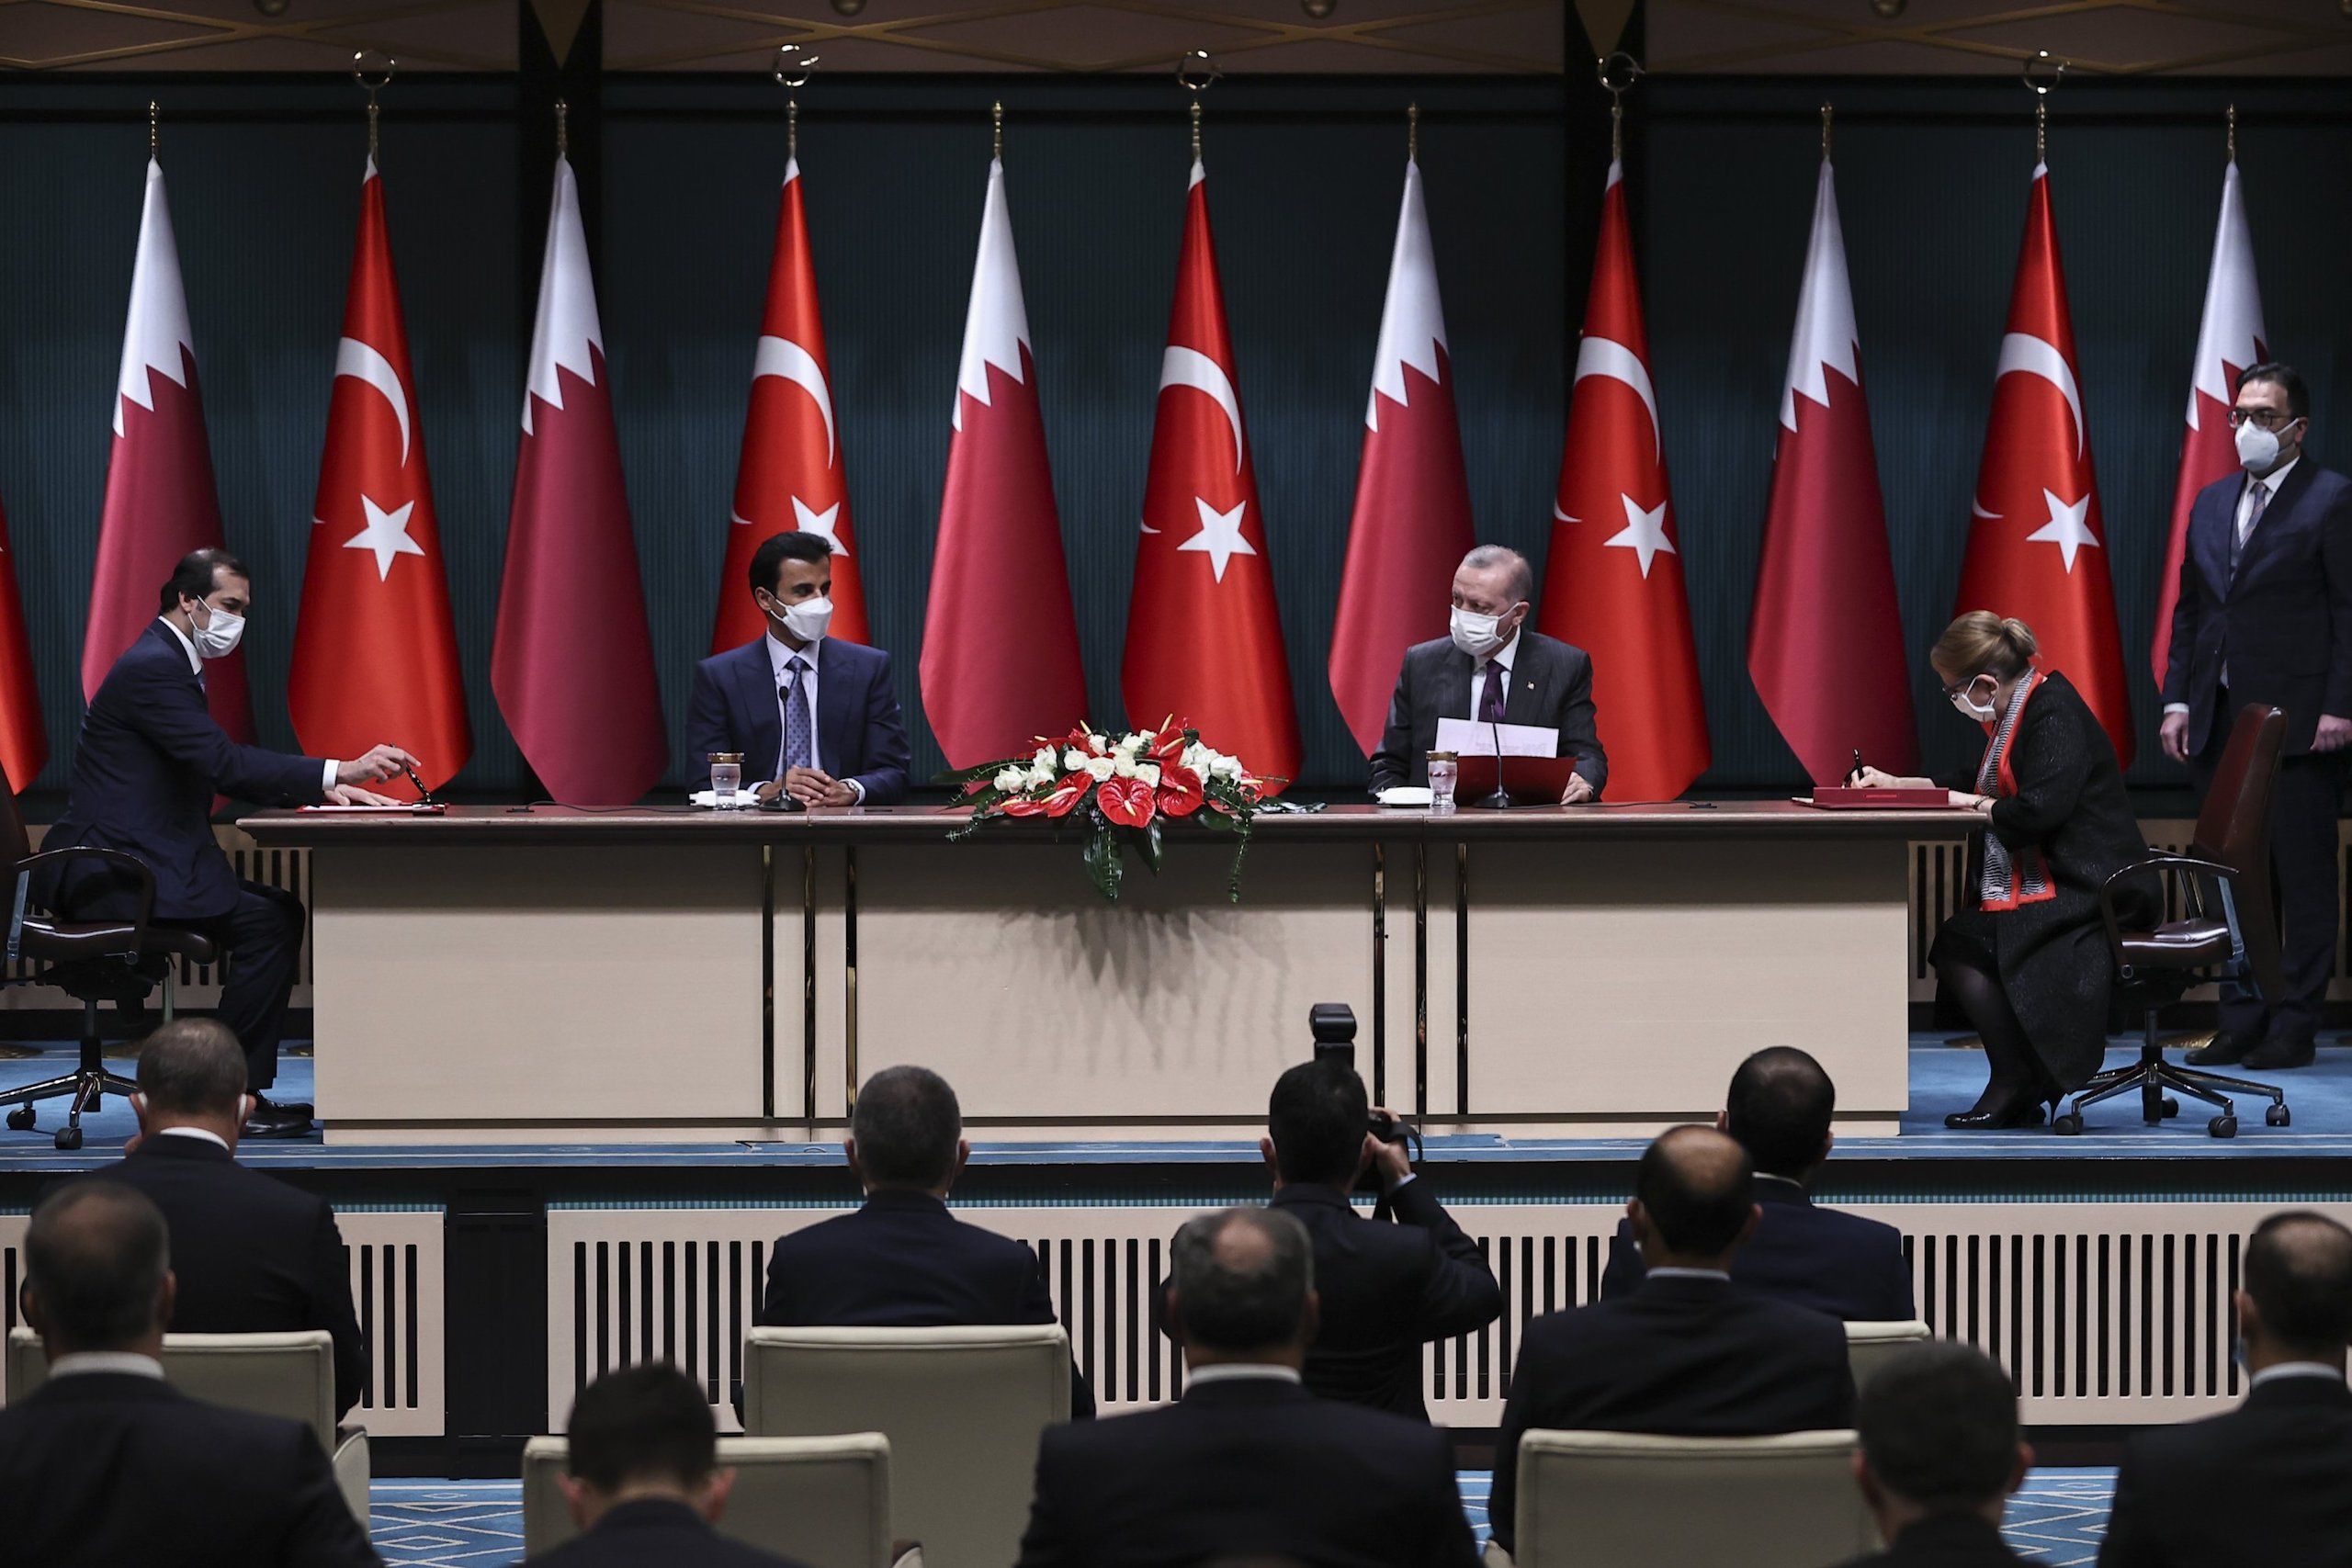 Members from Turkish and Qatari government at a press conference, signing trade documents in front of country flags